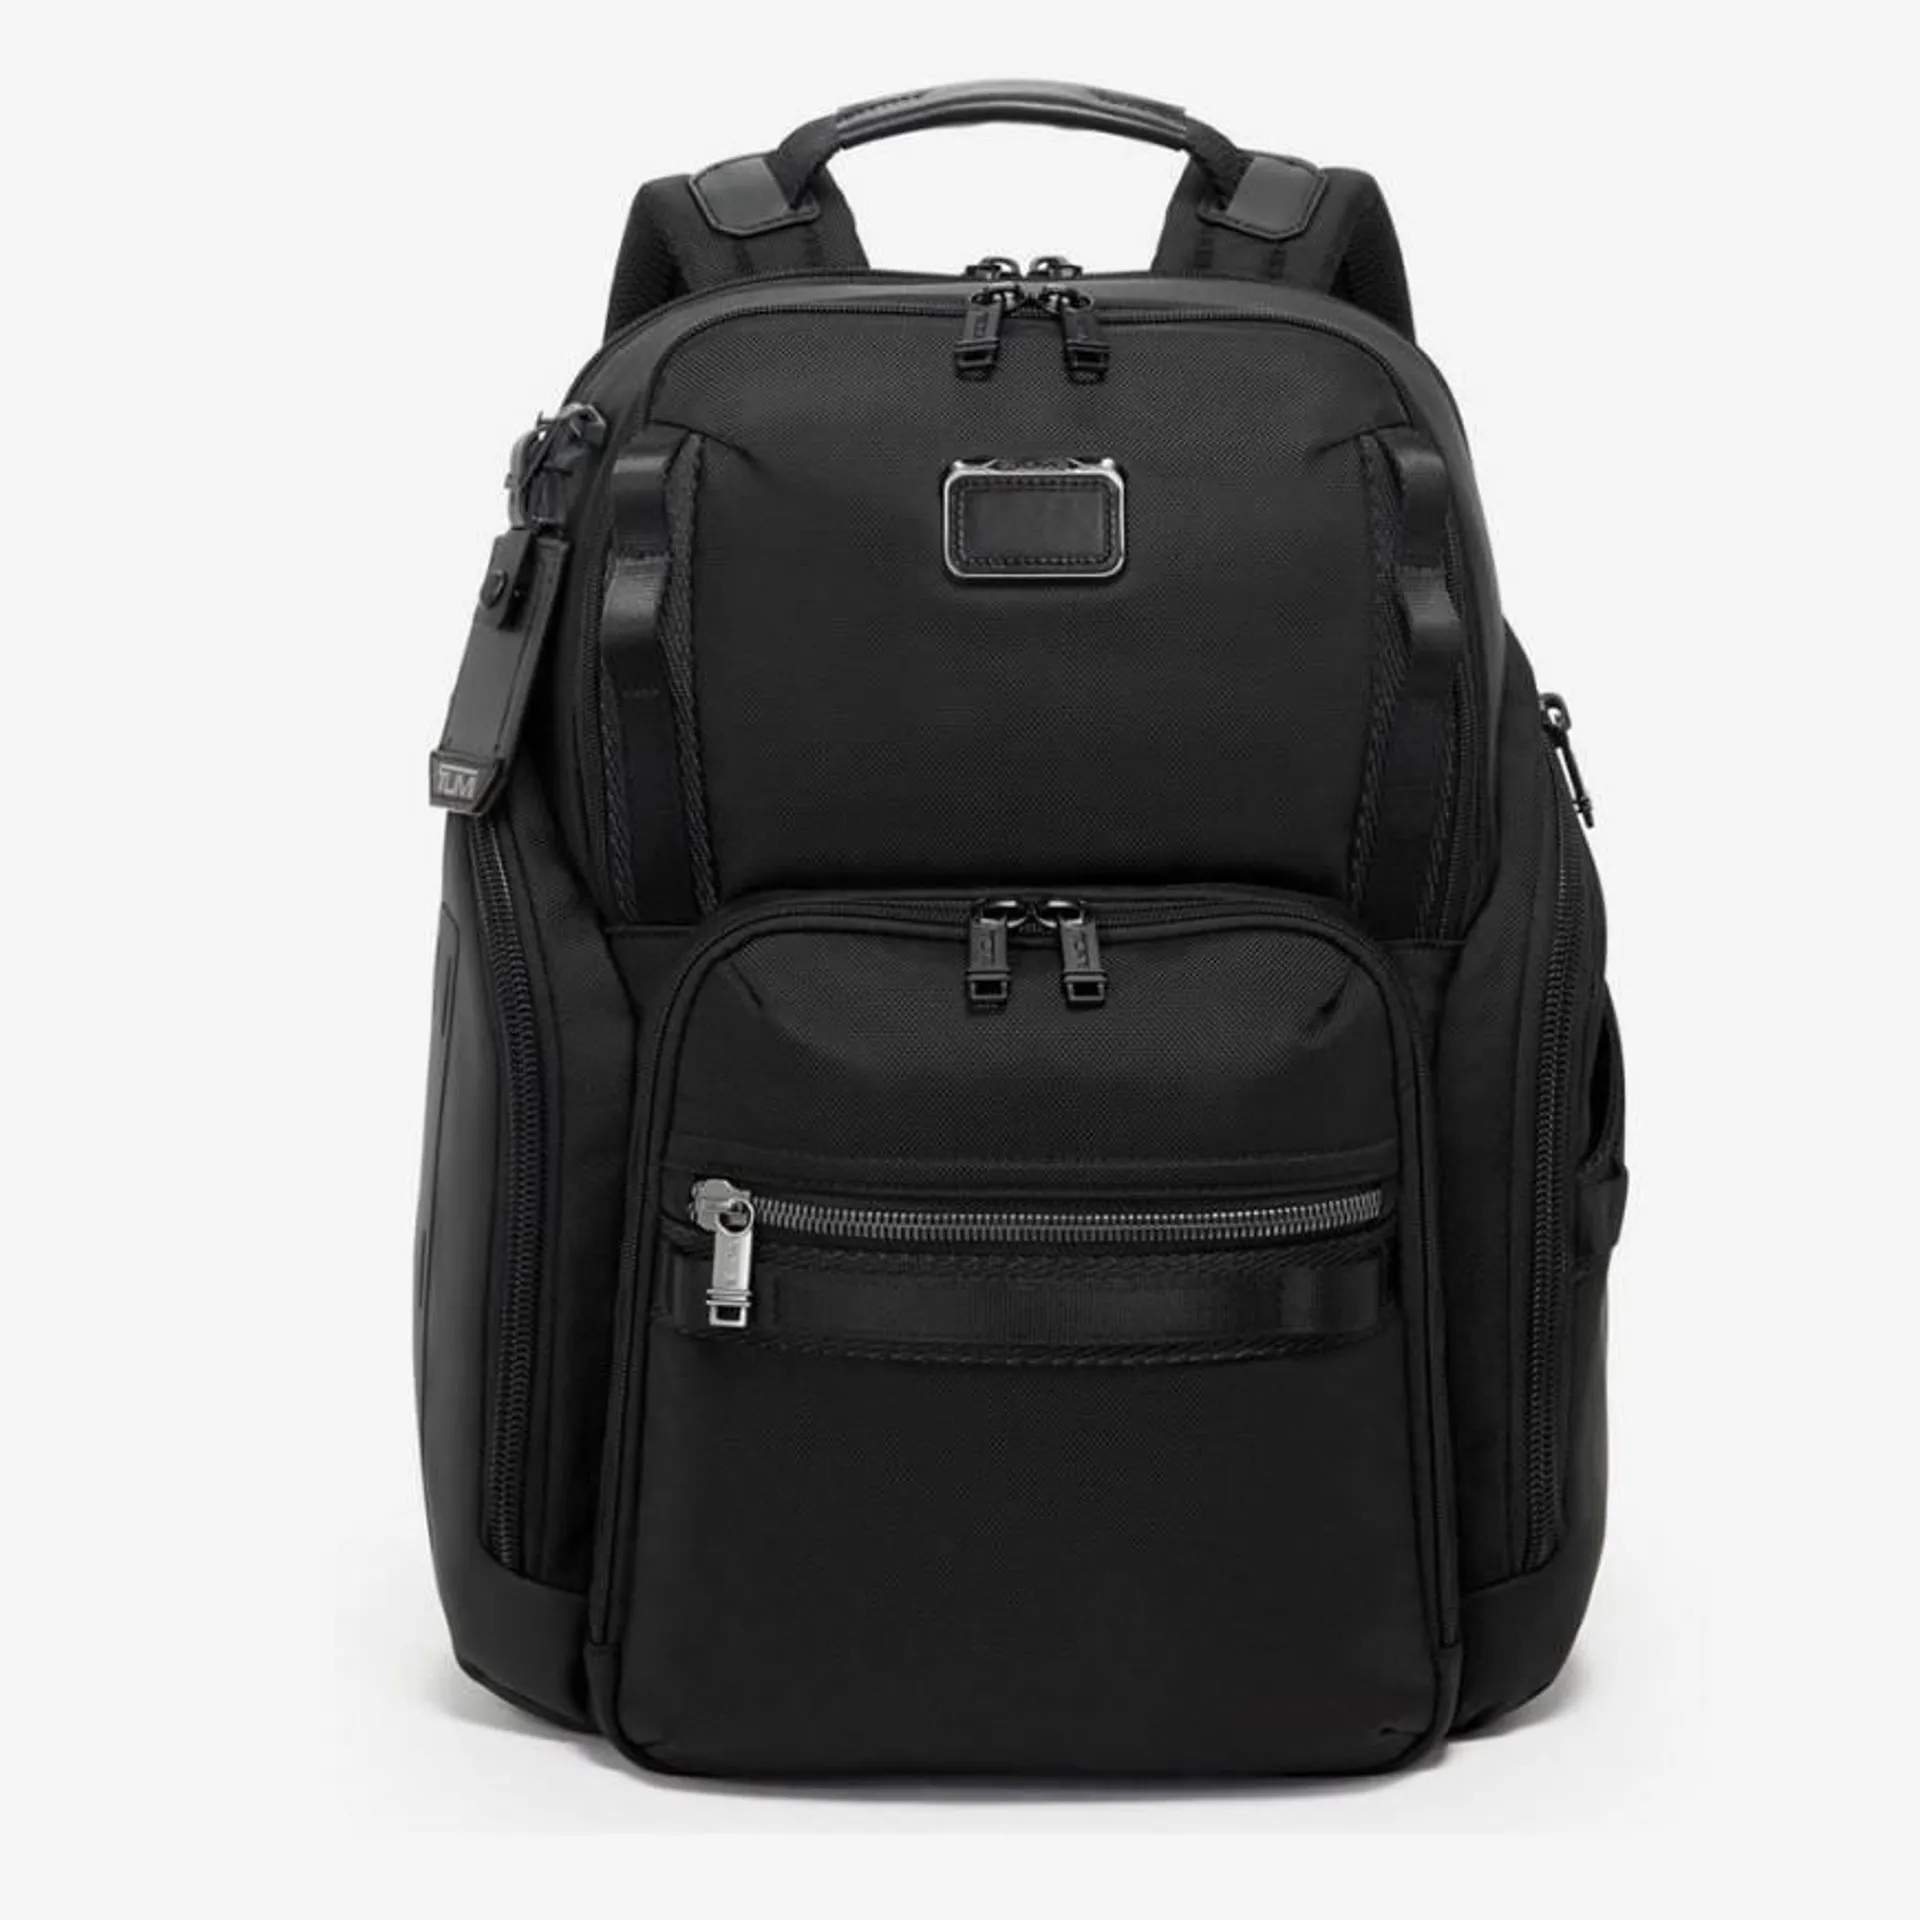 Backpack Search Alpha Bra Negro